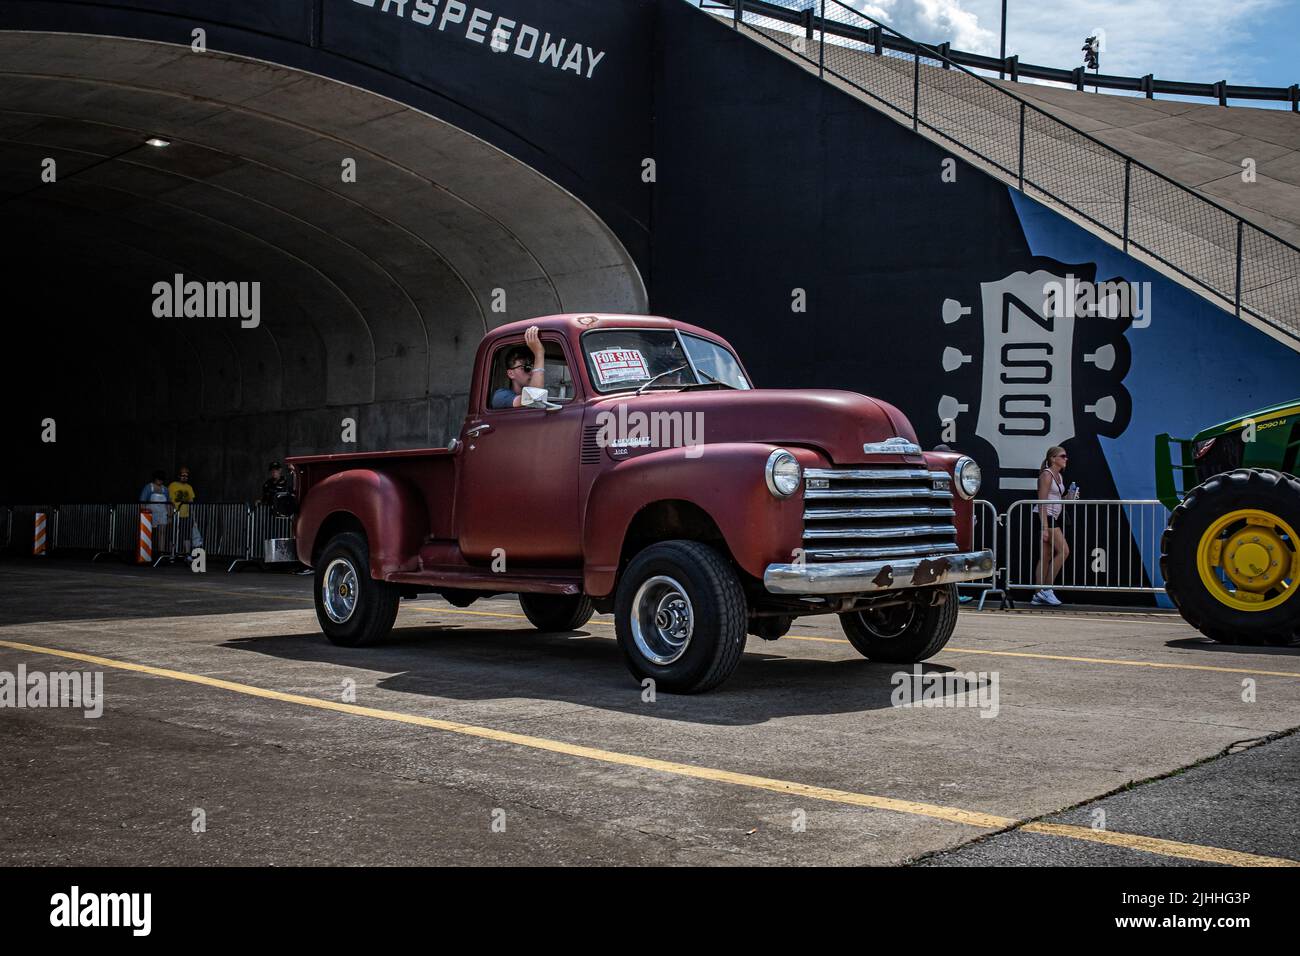 Lebanon, TN - May 14, 2022: Low perspective front corner view of a 1949 Chevrolet 3100 Pickup Truck at a local car show. Stock Photo